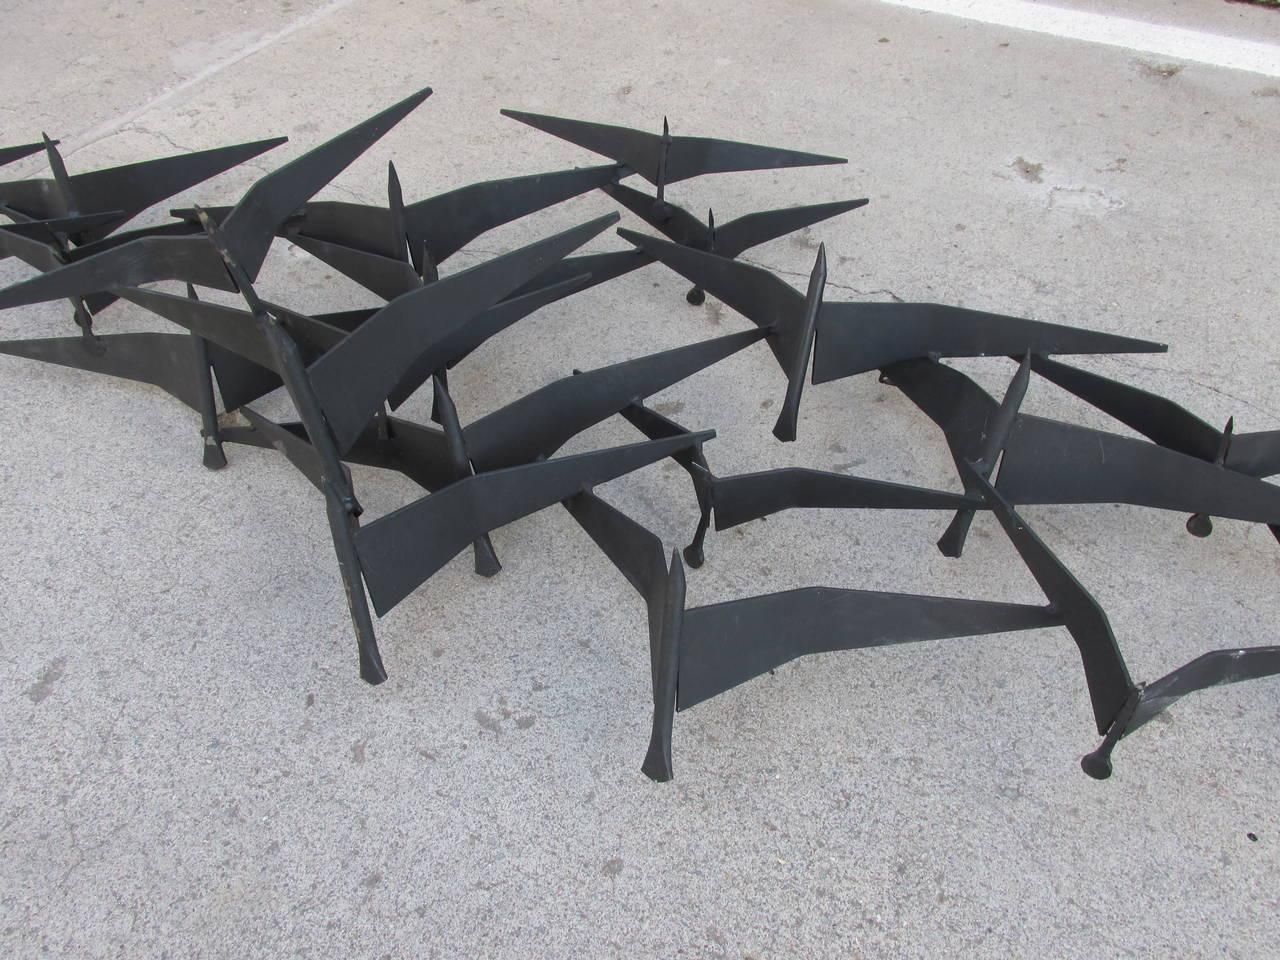 Birds In Flight Metal Wall Artcurtis Jere At 1stdibs With Regard To Metal Wall Art Birds In Flight (View 4 of 20)